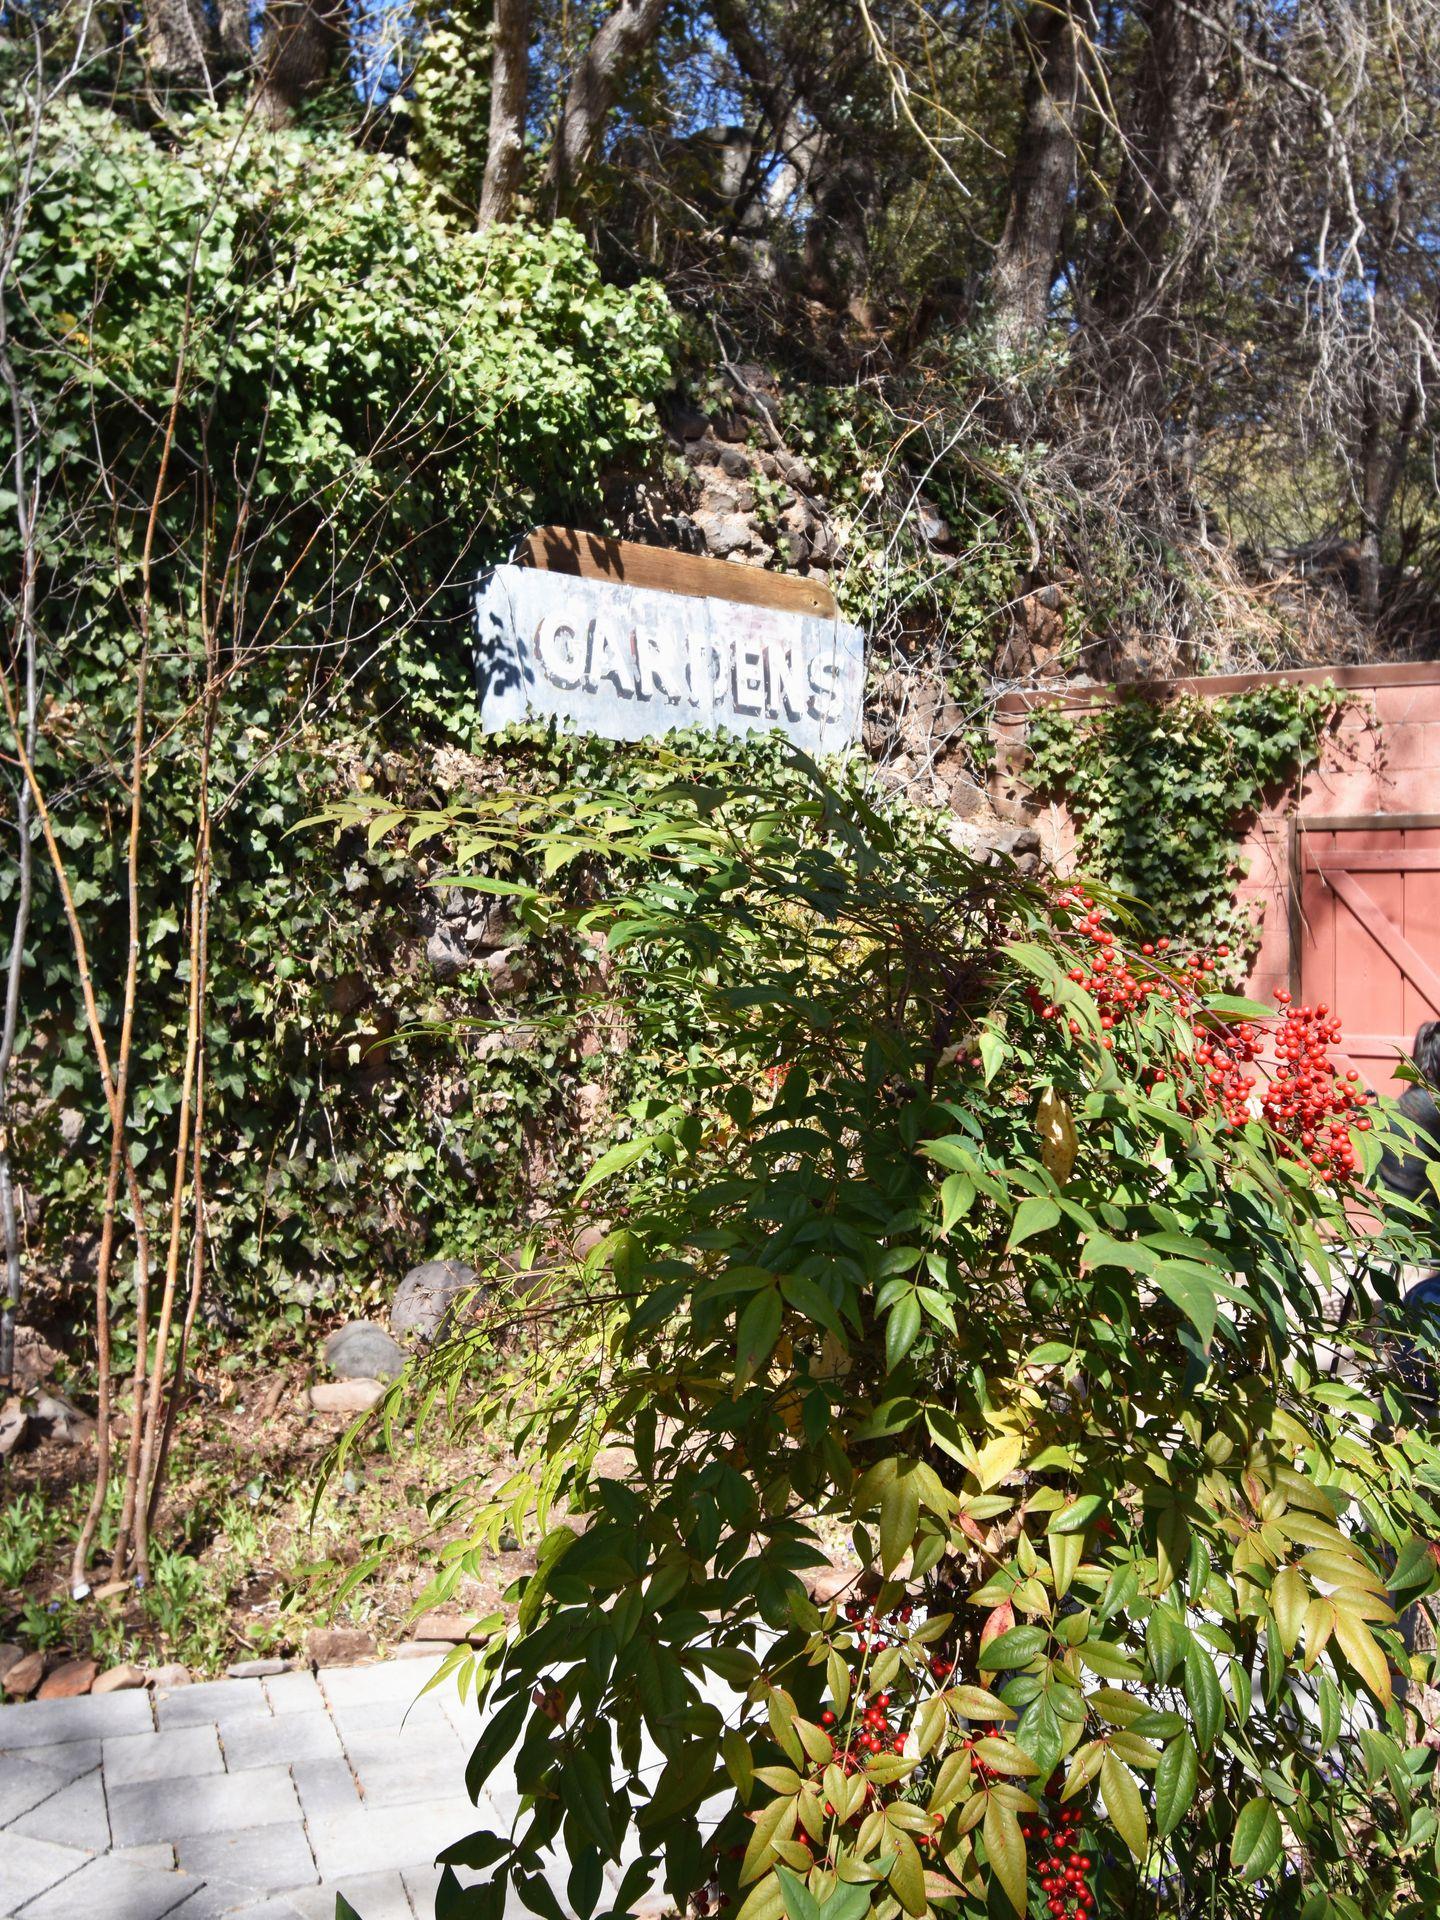 A wall covered in vines and greenery with a small sign that reads "Gardens" surrounded by the plants.